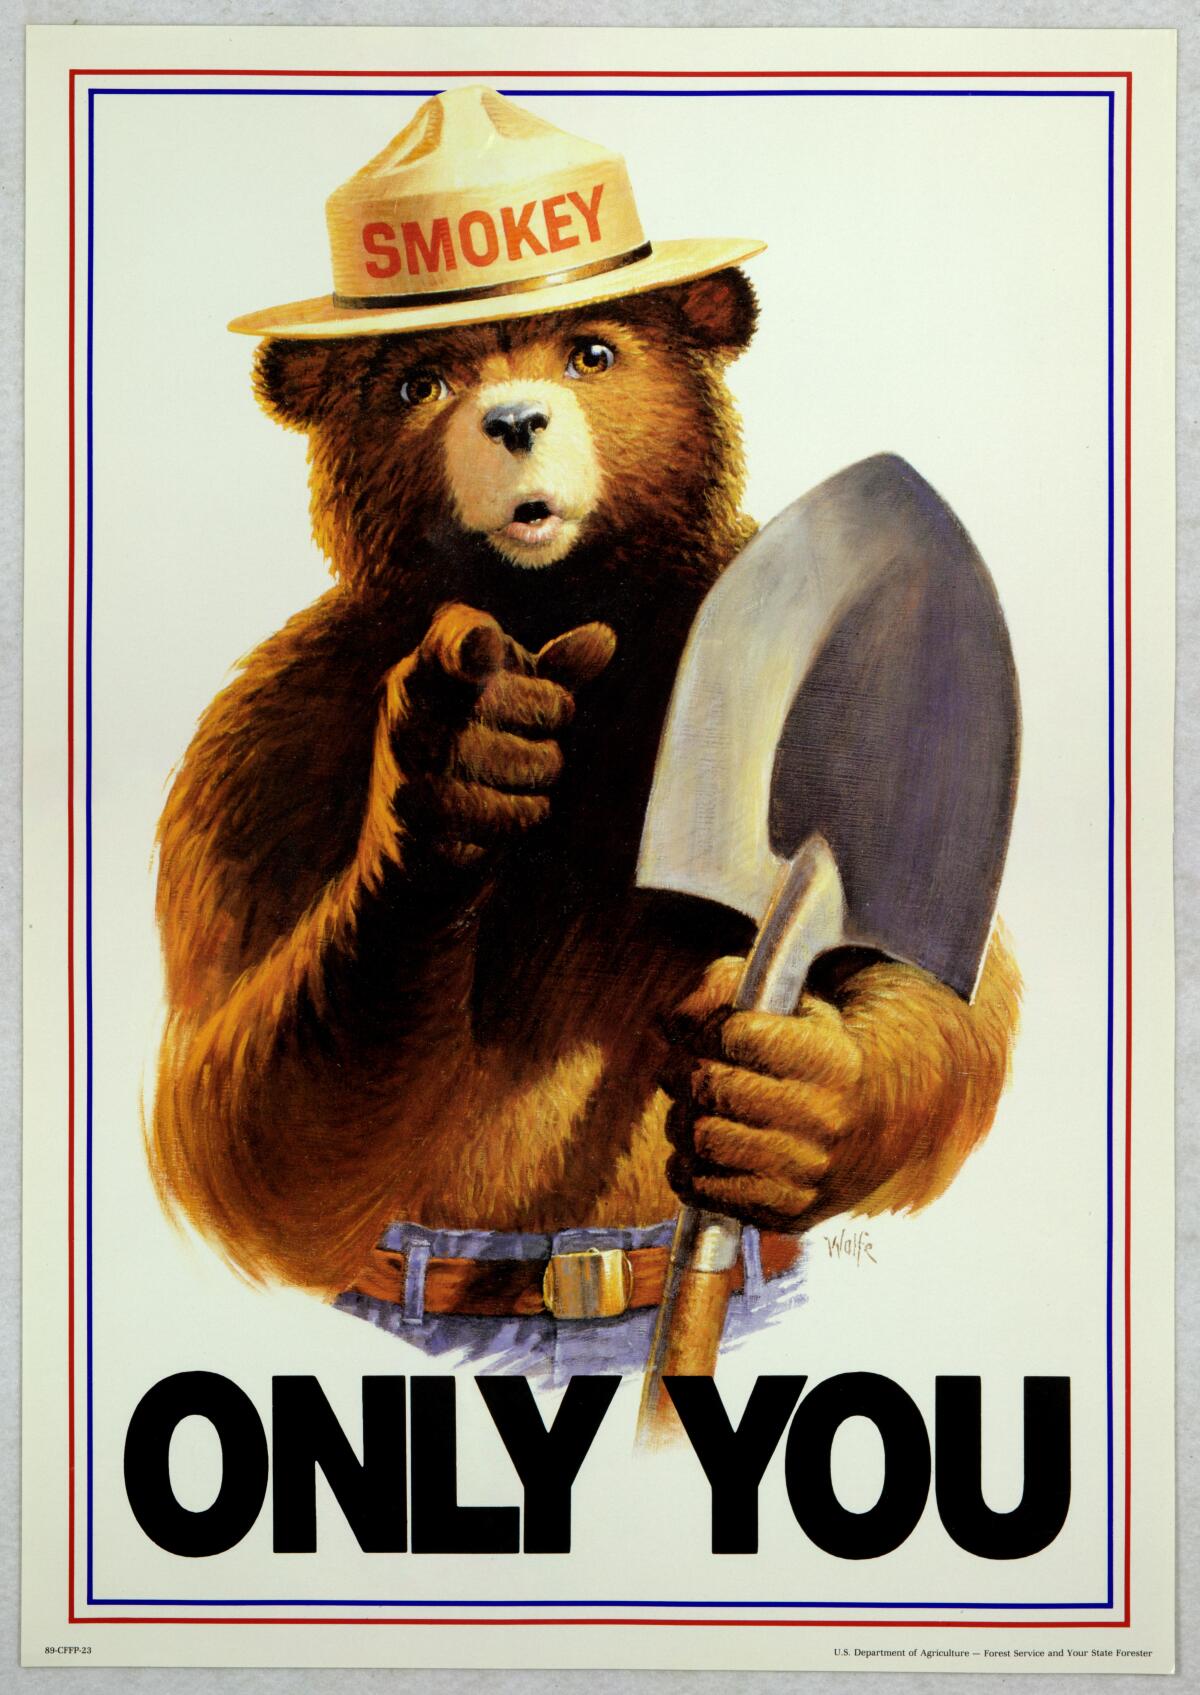 A poster of a bear holding a shovel and wearing a hat that says "Smokey" on it.